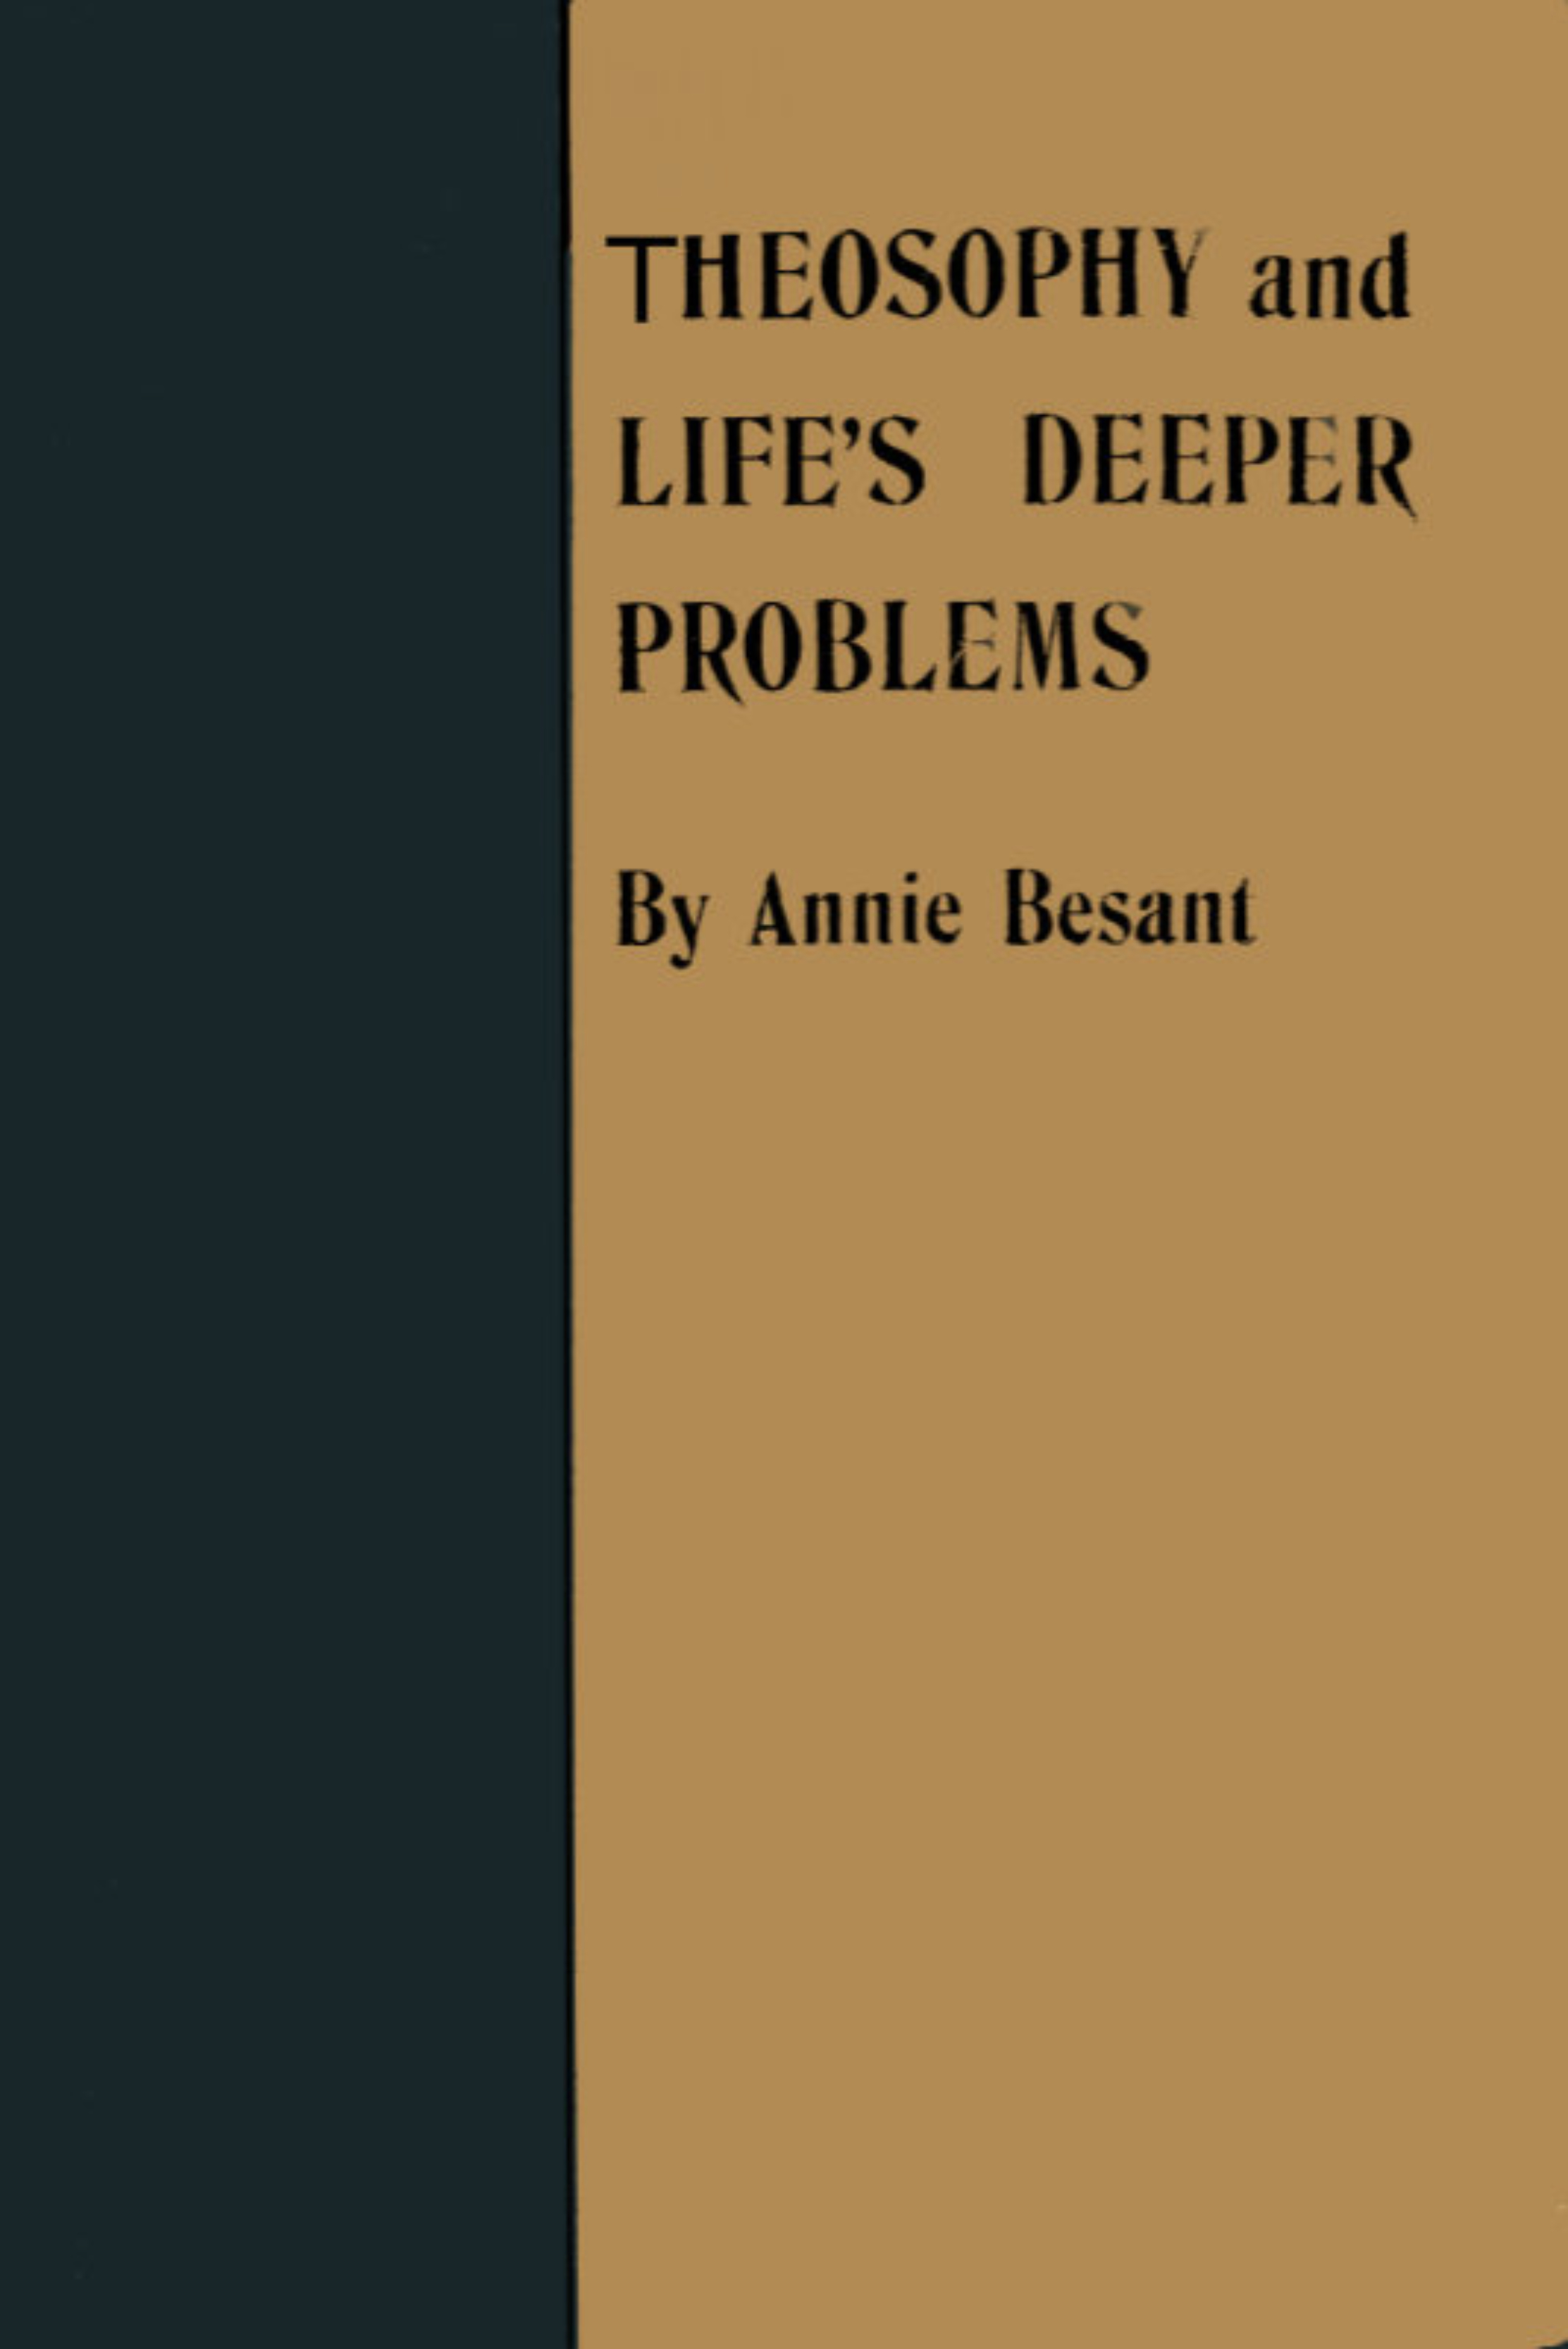 Theosophy and Life's Deeper Problems&#10;Being the Four Convention Lectures Delivered in Bombay at the Fortieth Anniversary of the Theosophical Society, December, 1915